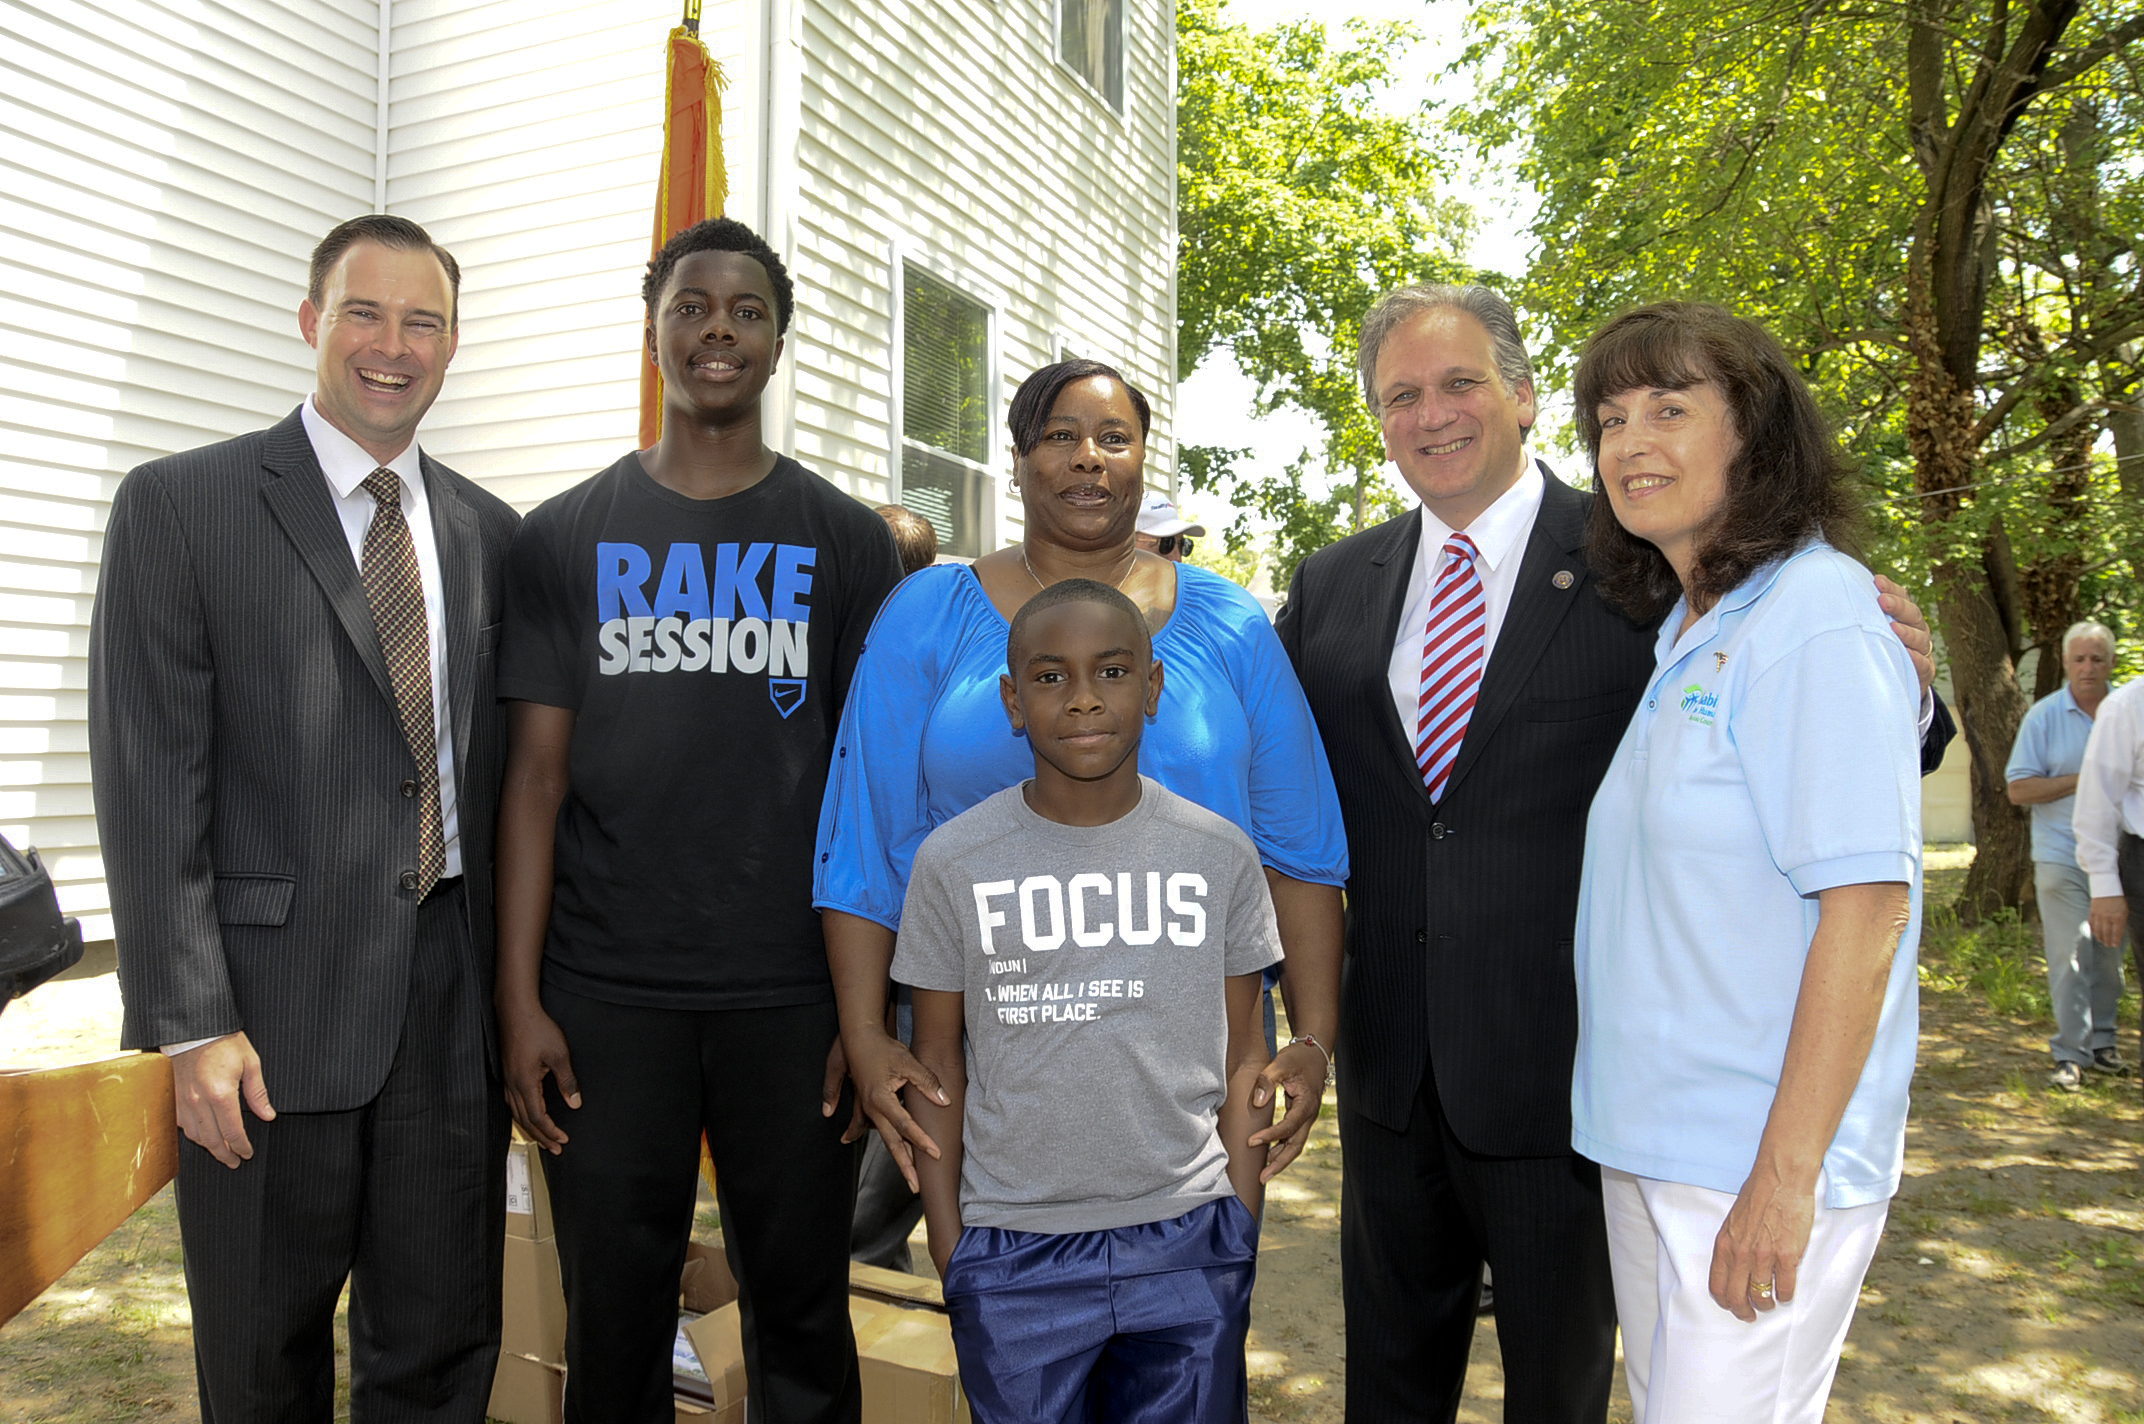 At the dedication of 17th home. Pictured (left to right): Mike Pfeiffer, Executive Director, Habitat for Humanity; Terryl, Michelle and Jahkobe Walden; County Executive Mangano; and Madeline Squeglia, President of Habitat for Humanity